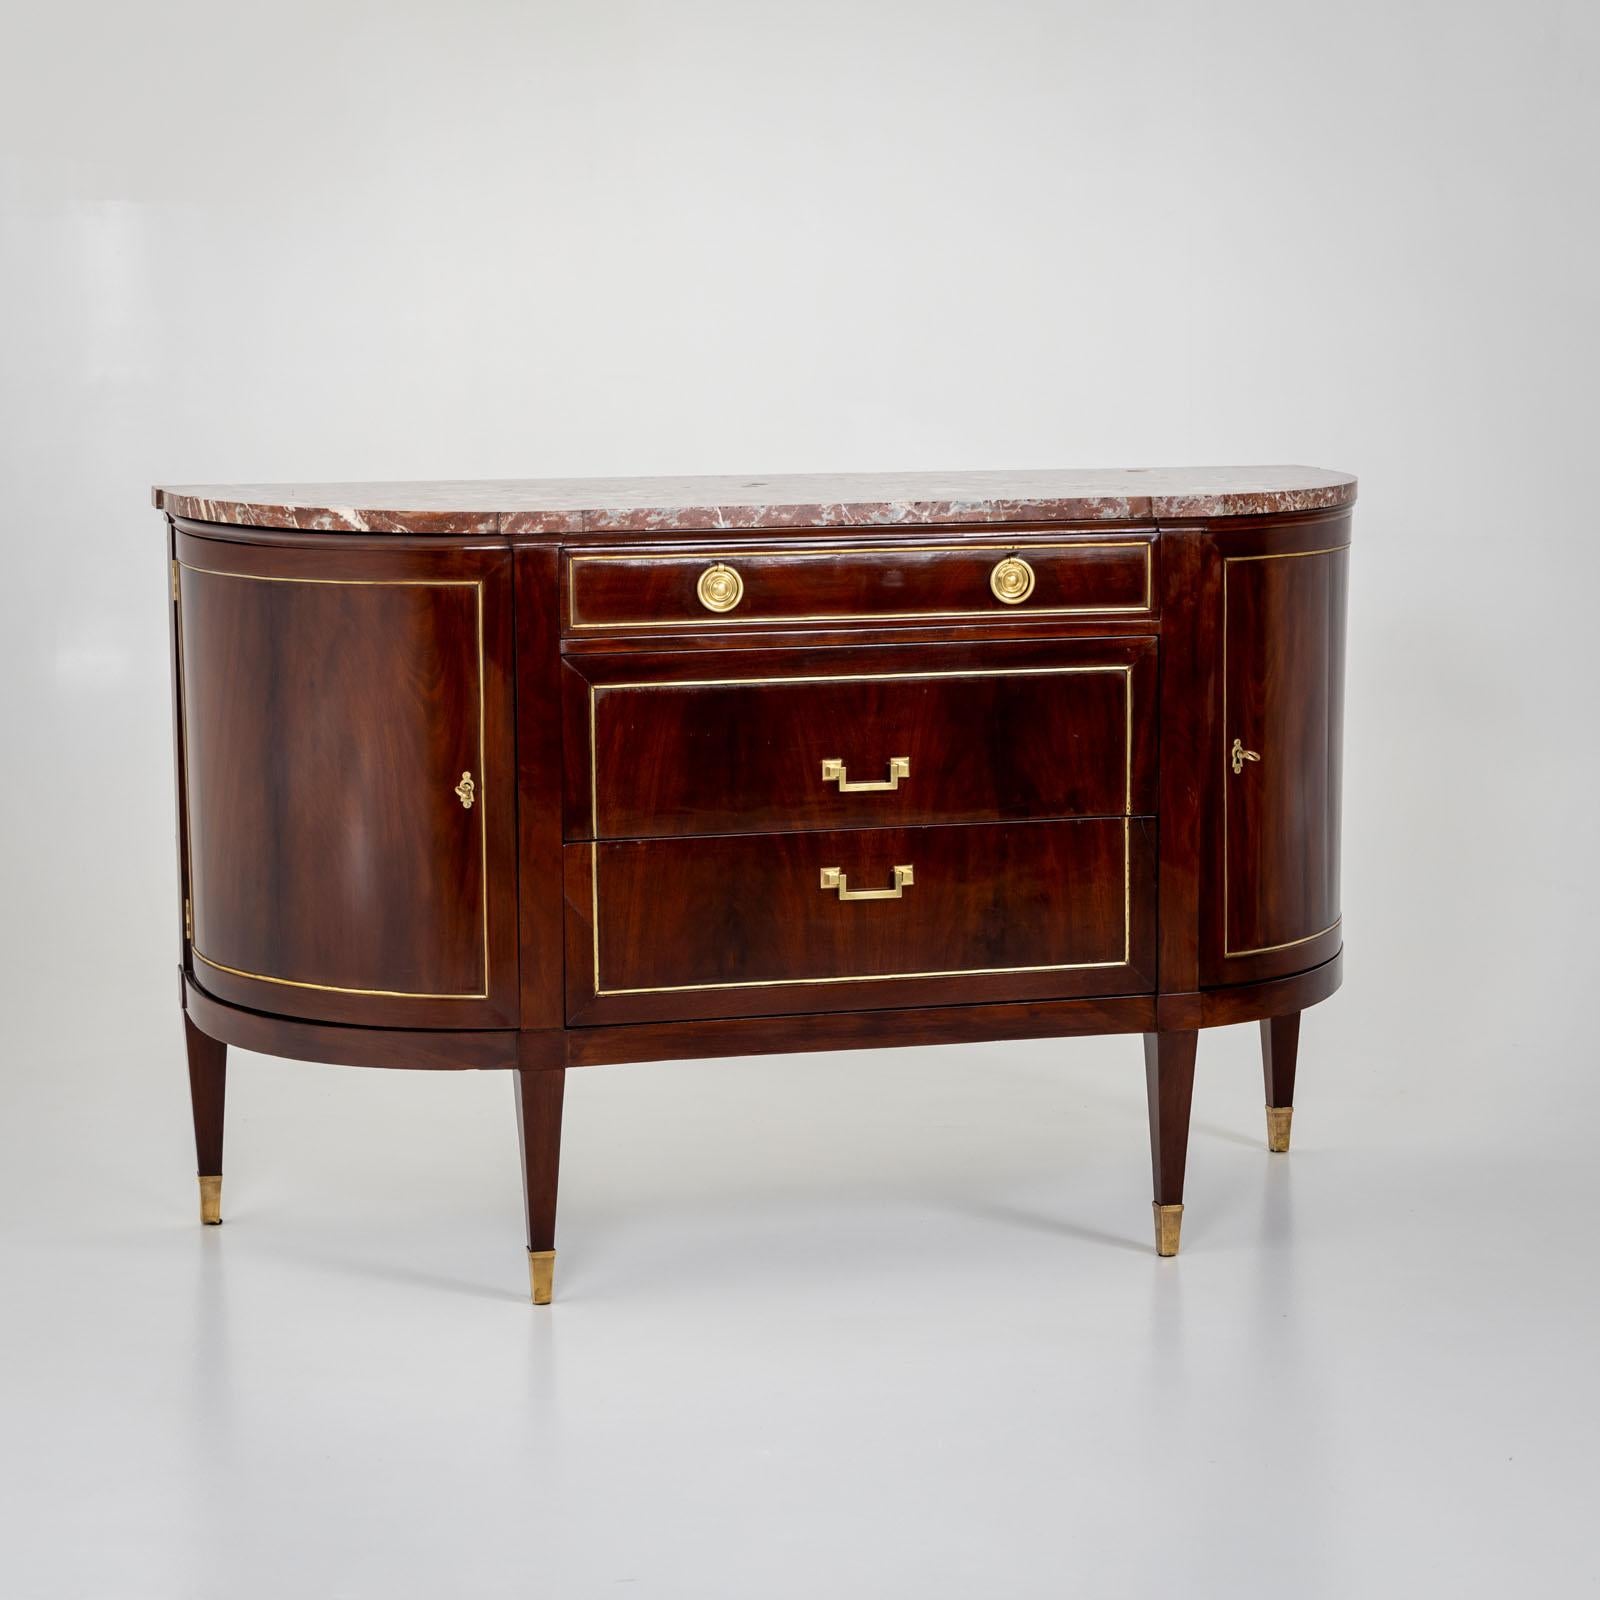 Demi-lune sideboard in Louis Seize style with red and white marble top and two doors and three drawers. The doors are framed with brass profiles. The sideboard is veneered in mahogany and stands on square tapered feet with brass sabots. 